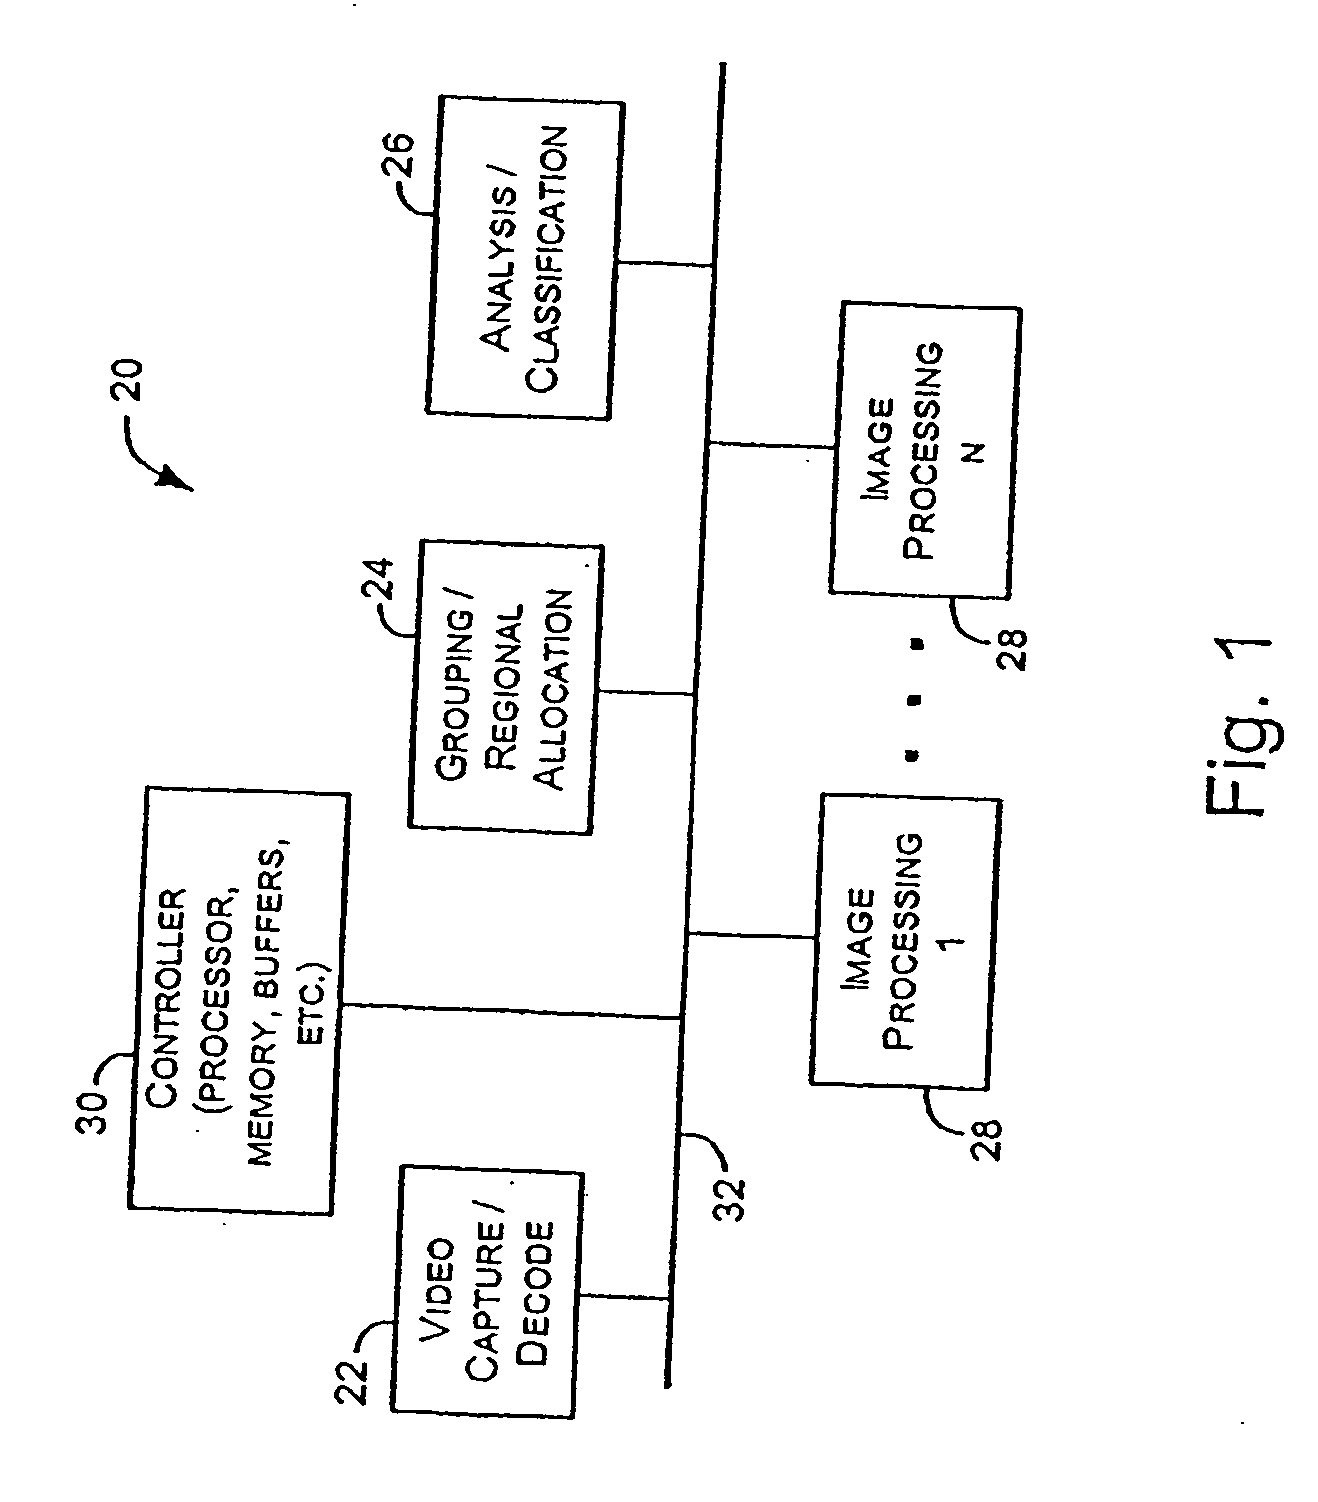 Video image processing with remote diagnosis and programmable scripting